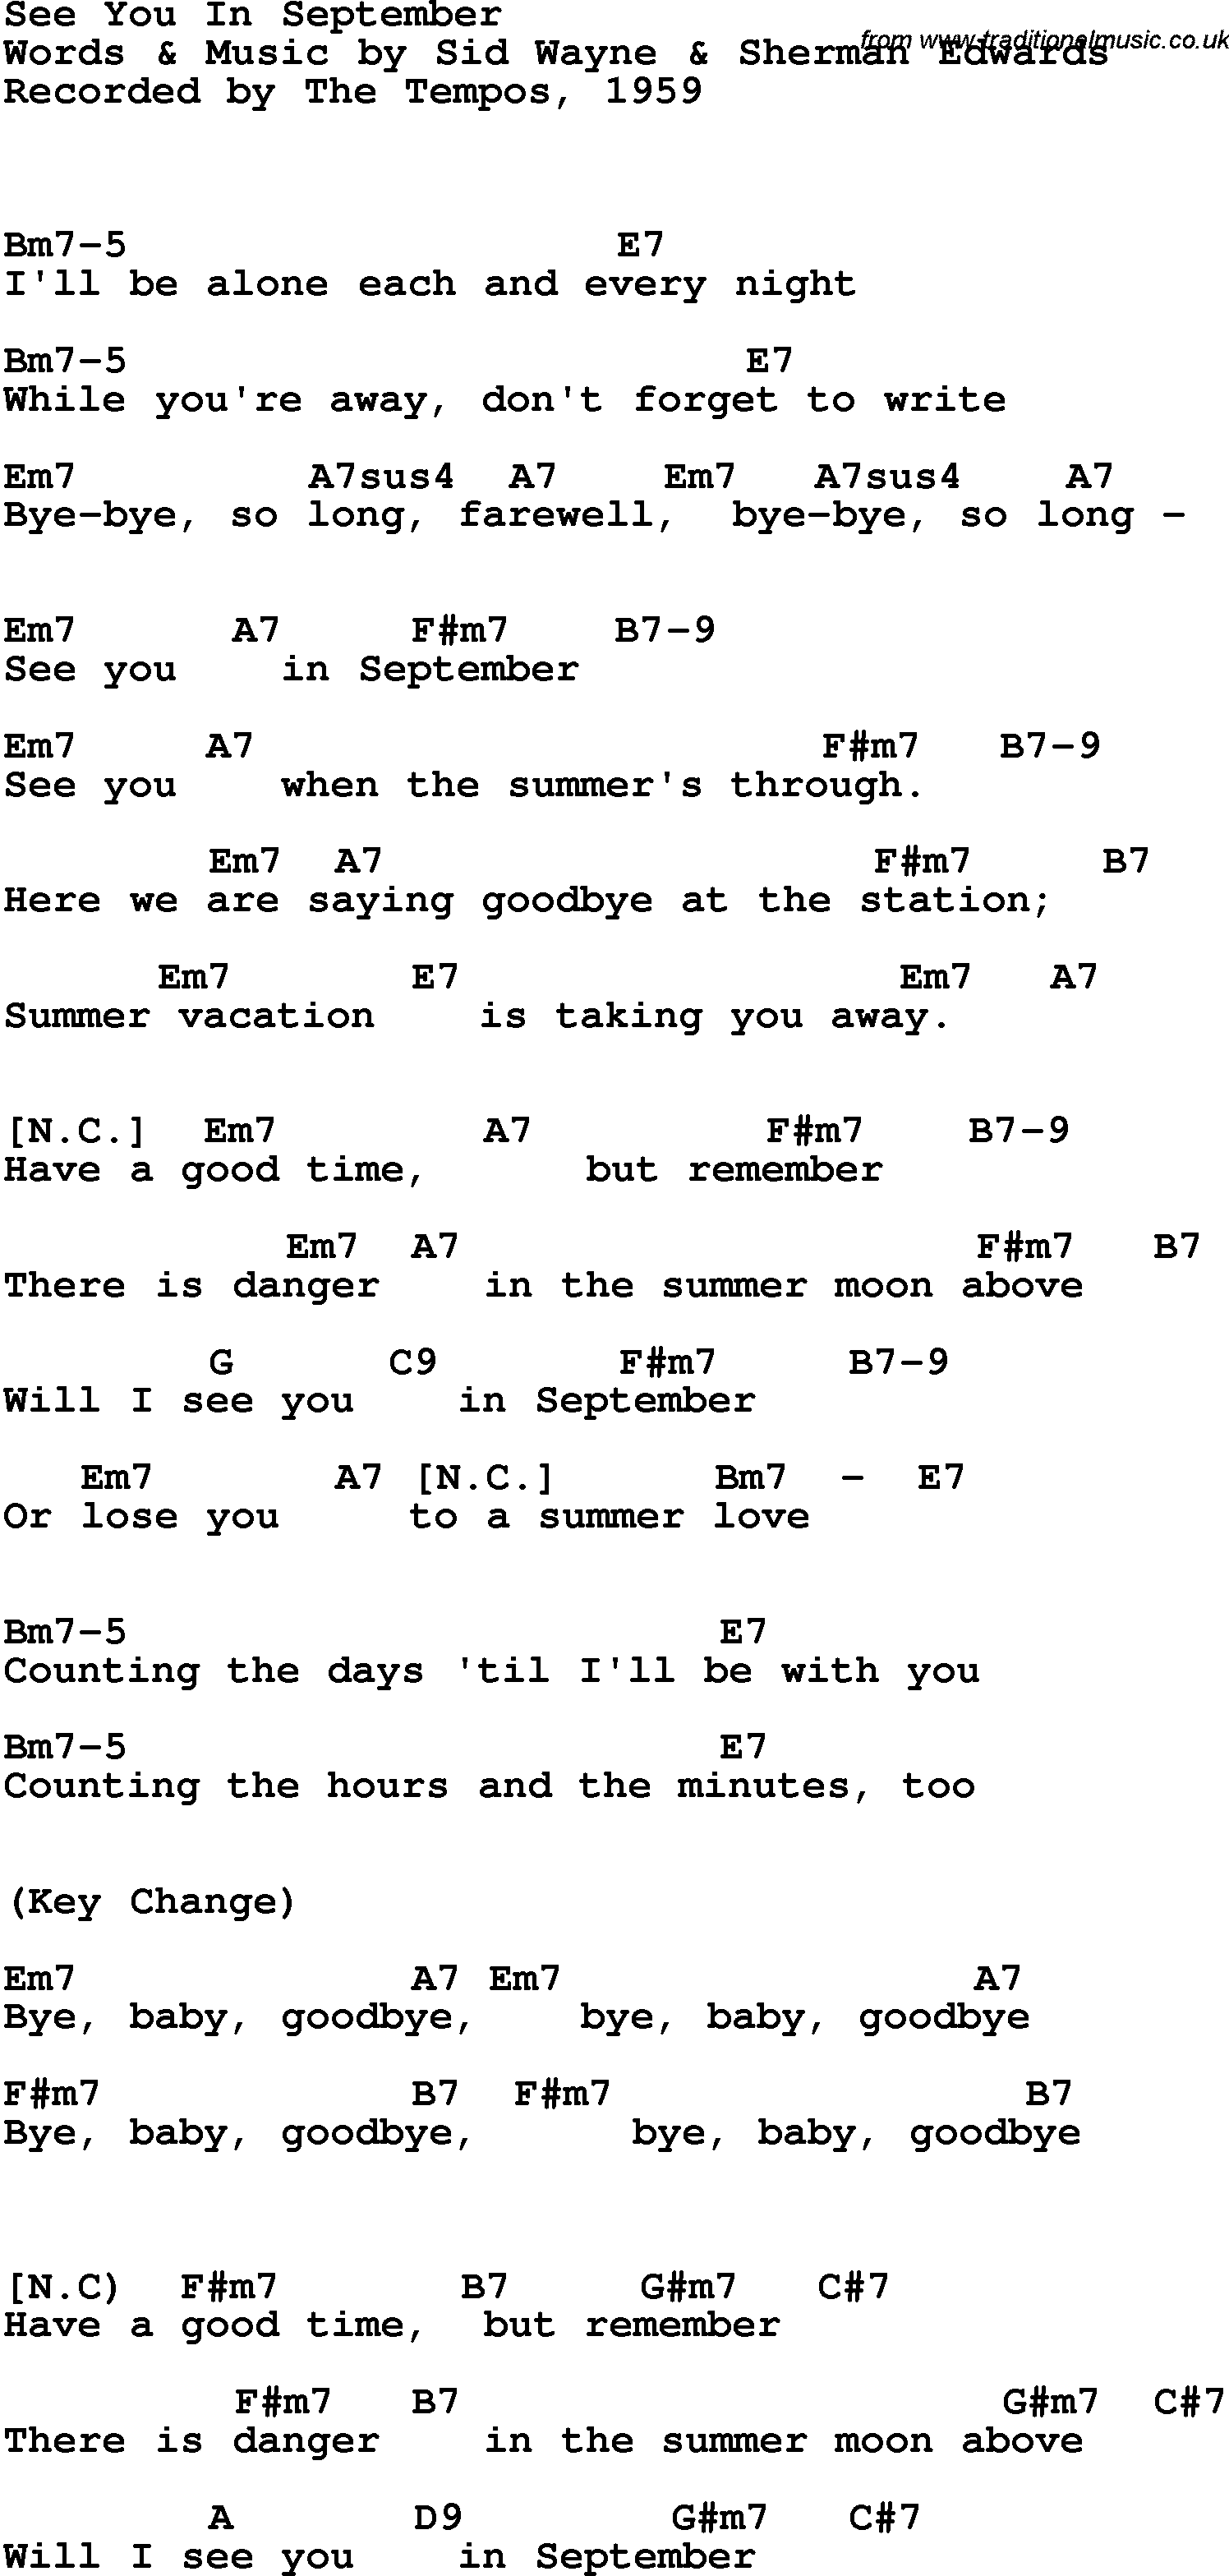 Song Lyrics with guitar chords for See You In September - The Tempos, 1959